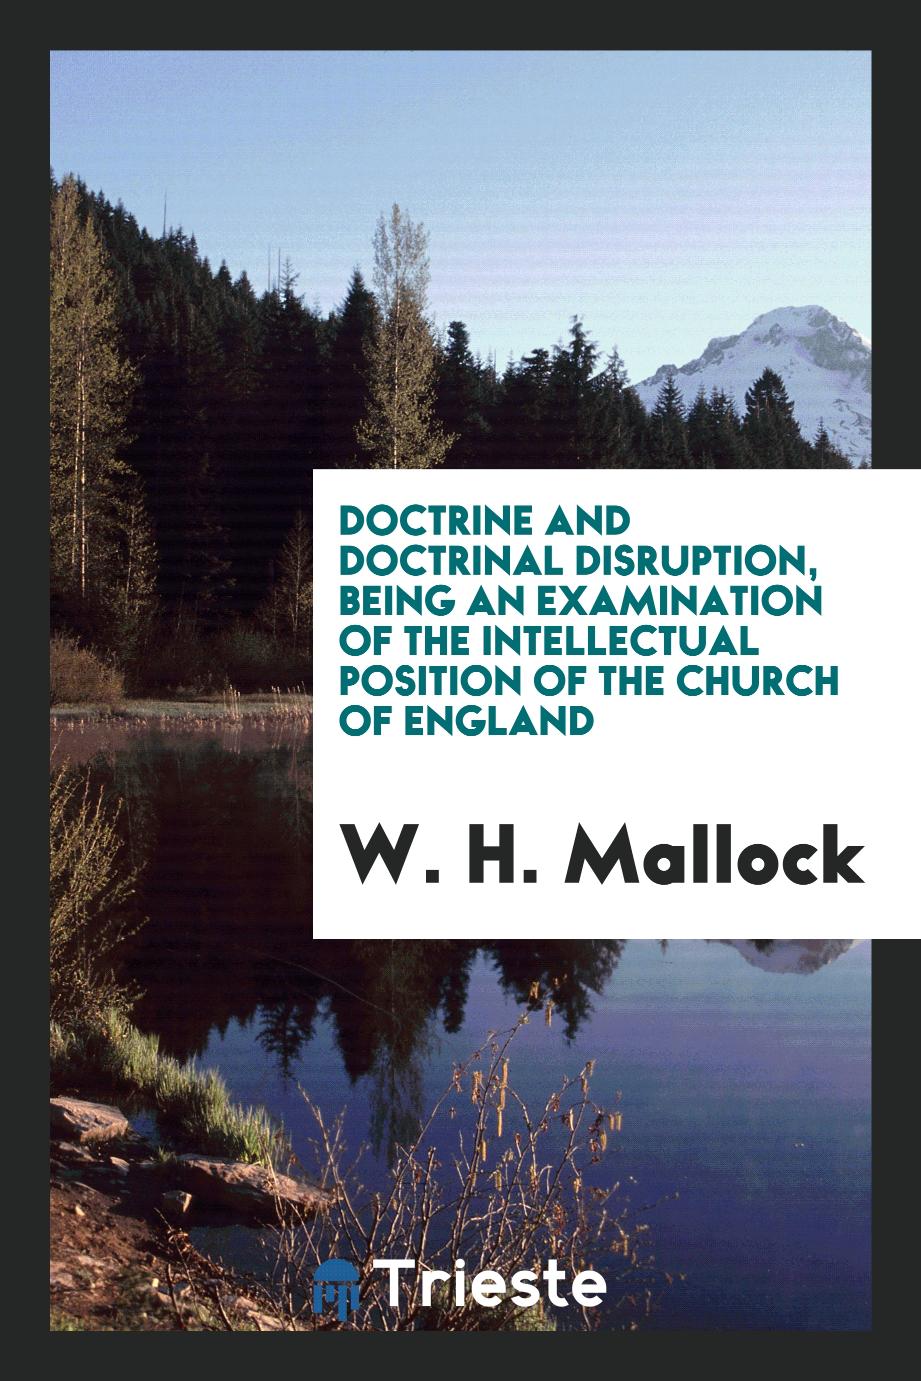 Doctrine and doctrinal disruption, being an examination of the intellectual position of the Church of England